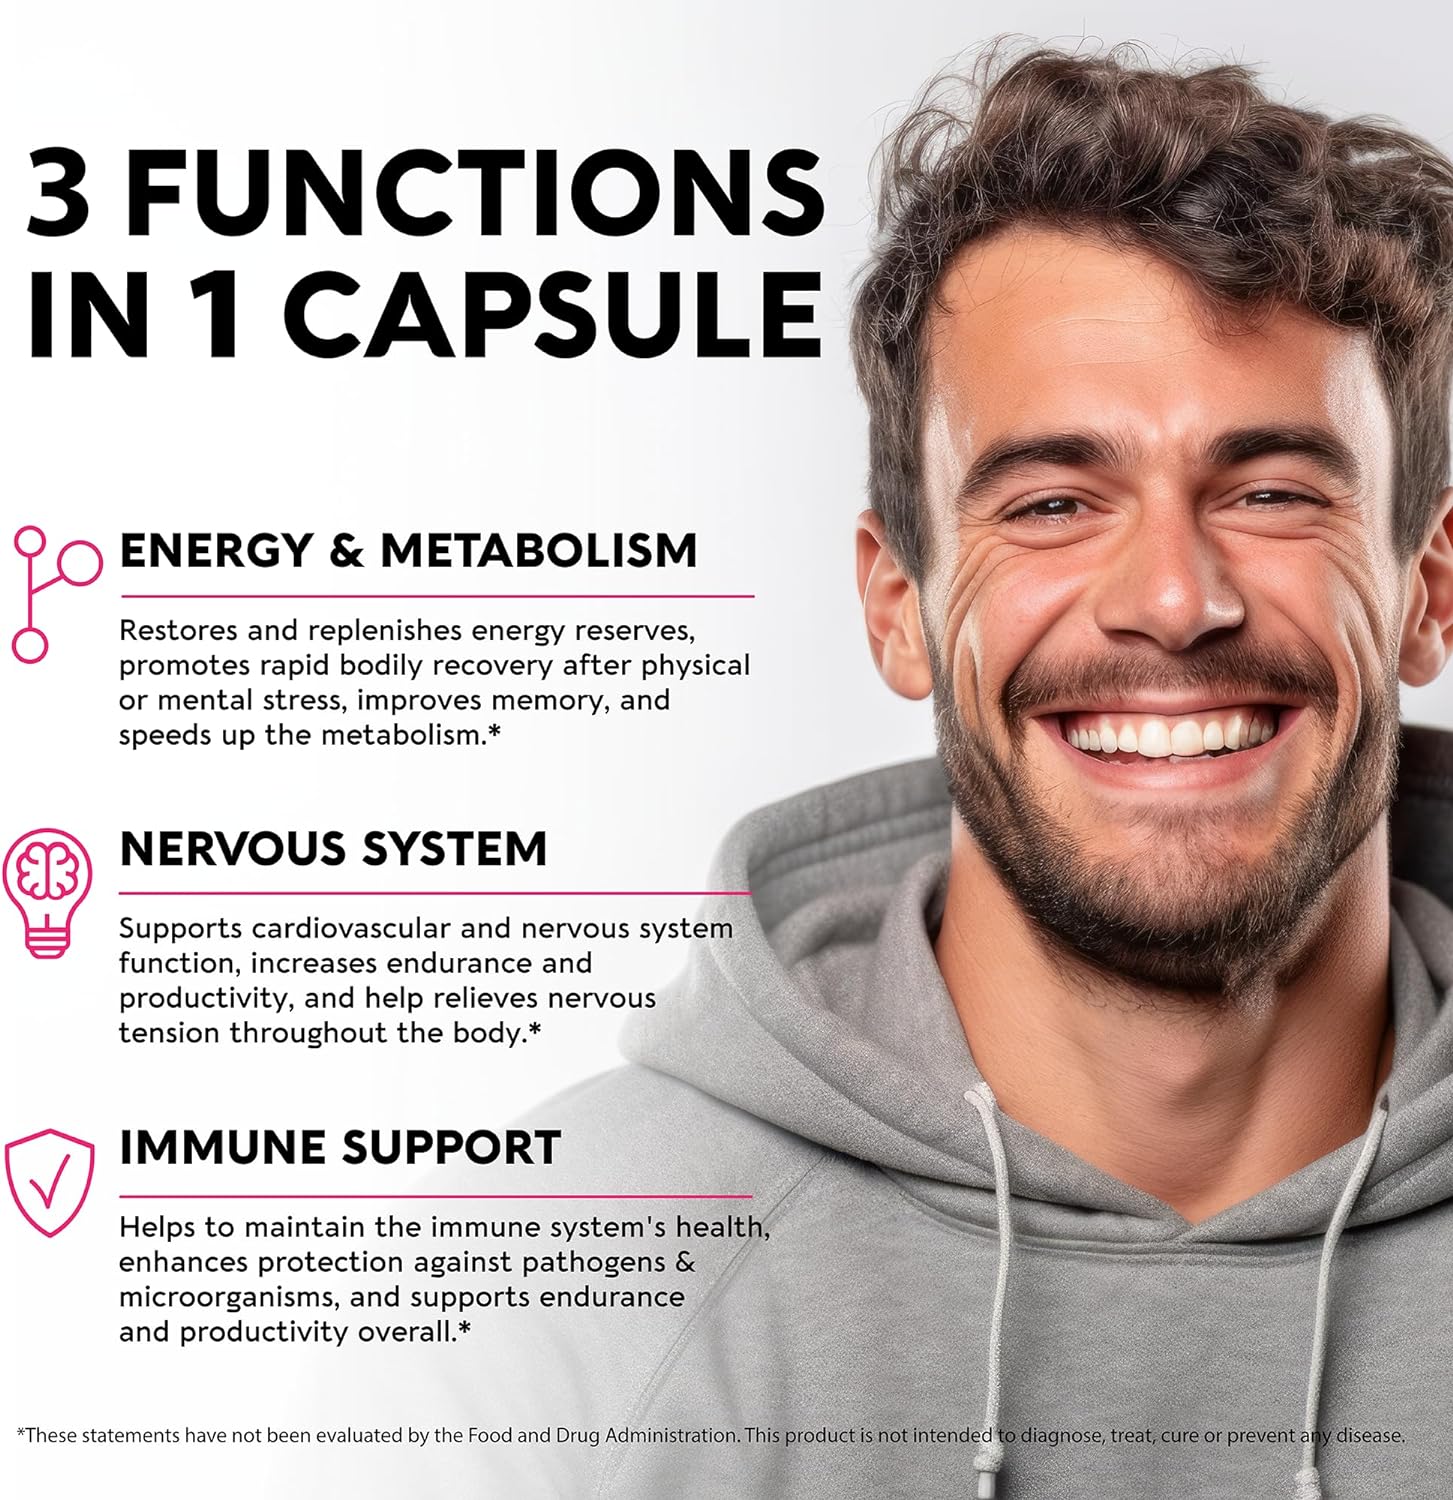 Vitamin B Complex - 11-in-1 B-Complex: B1, B2, B3, B5, B6, B7, B8, B9, B12 with Vitamin C, Choline, Inositol - Made in USA - Energy, Brain  Heart Support Supplements - 754 mg - 60 Vegan Capsules